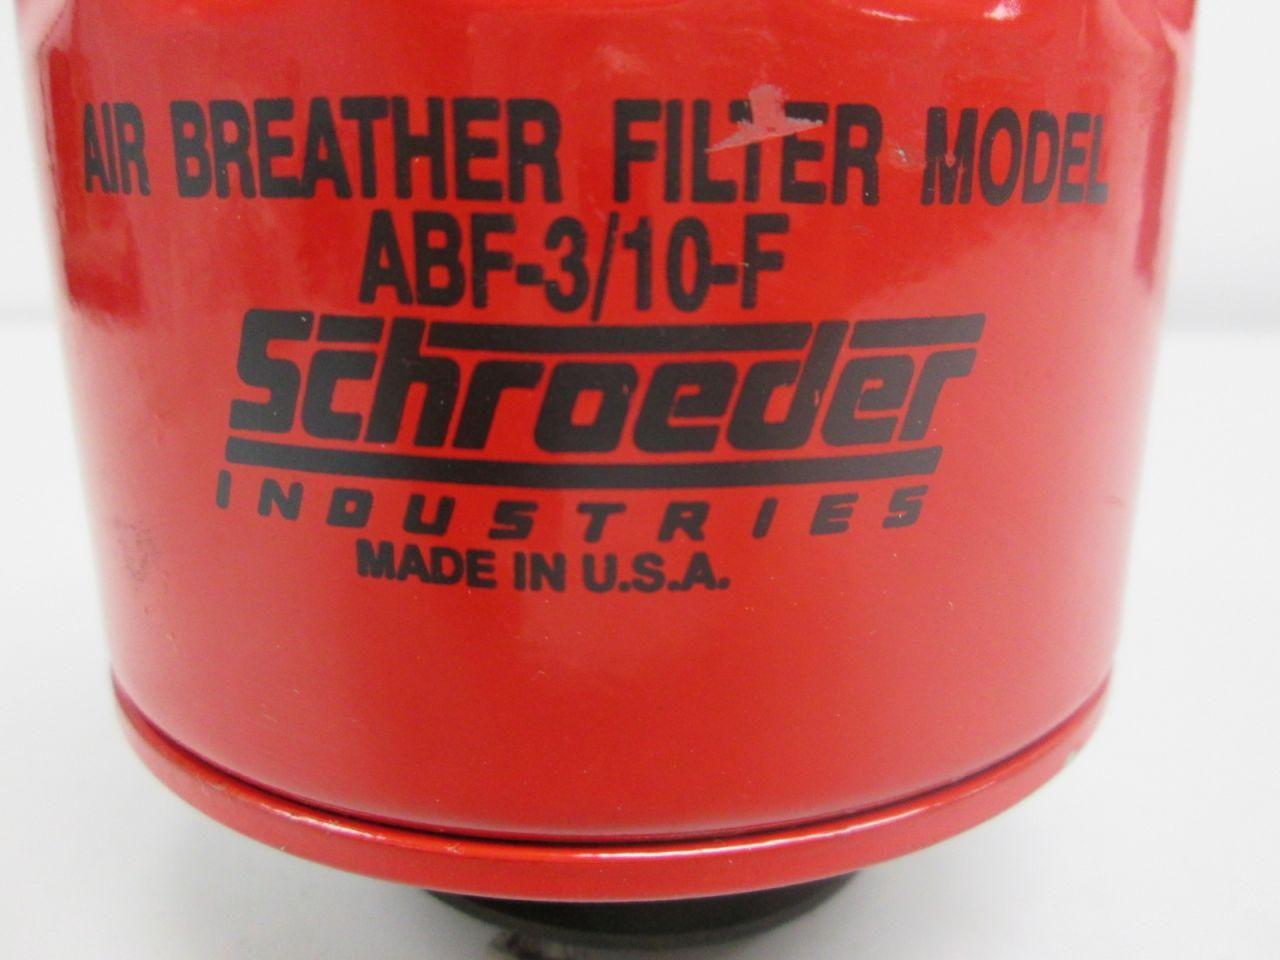 SCHROEDER AIR BREATHER FILTER MODEL ABF 3/10  SPIN ON ,F3 ABG10 ABF25 ABF 3/10 